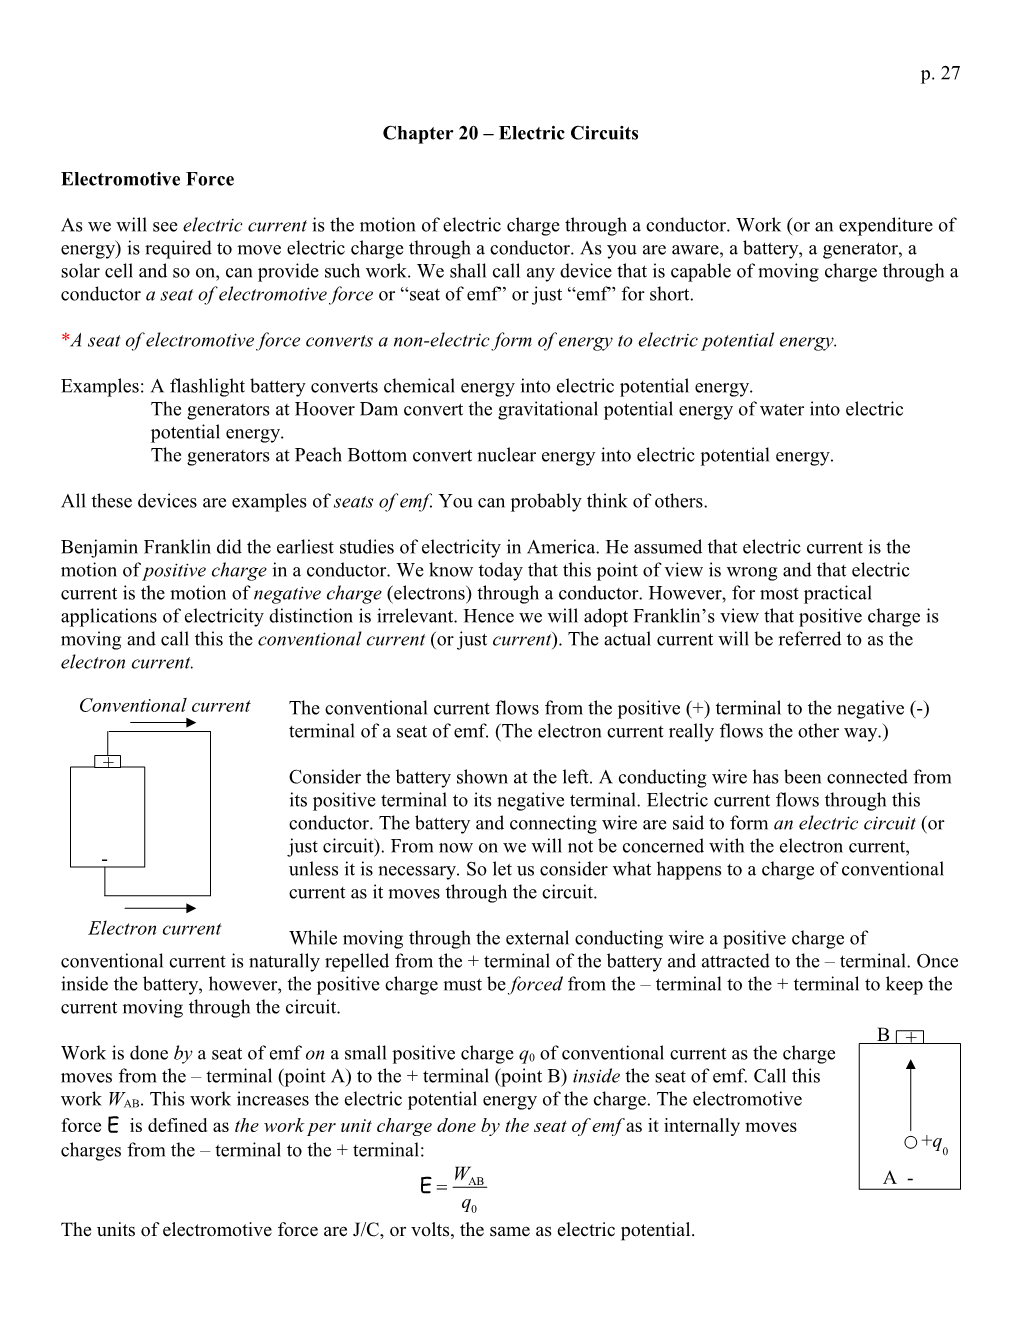 Chapter 20 Electric Circuits